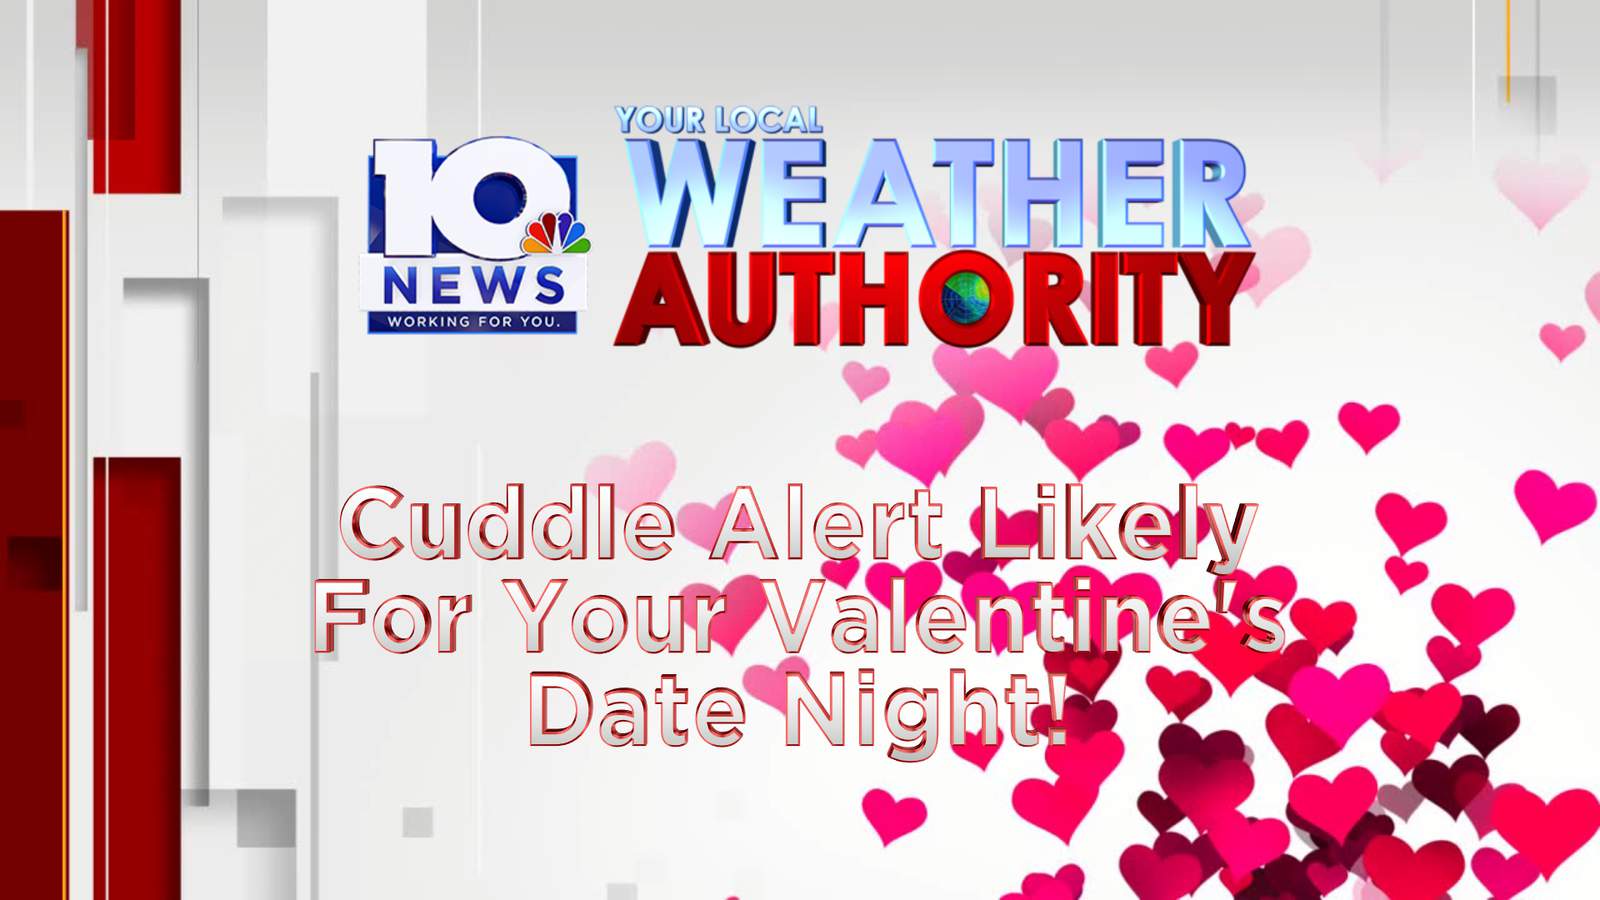 Beyond The Forecast: Cuddle alerts likely for your Valentine’s date night!